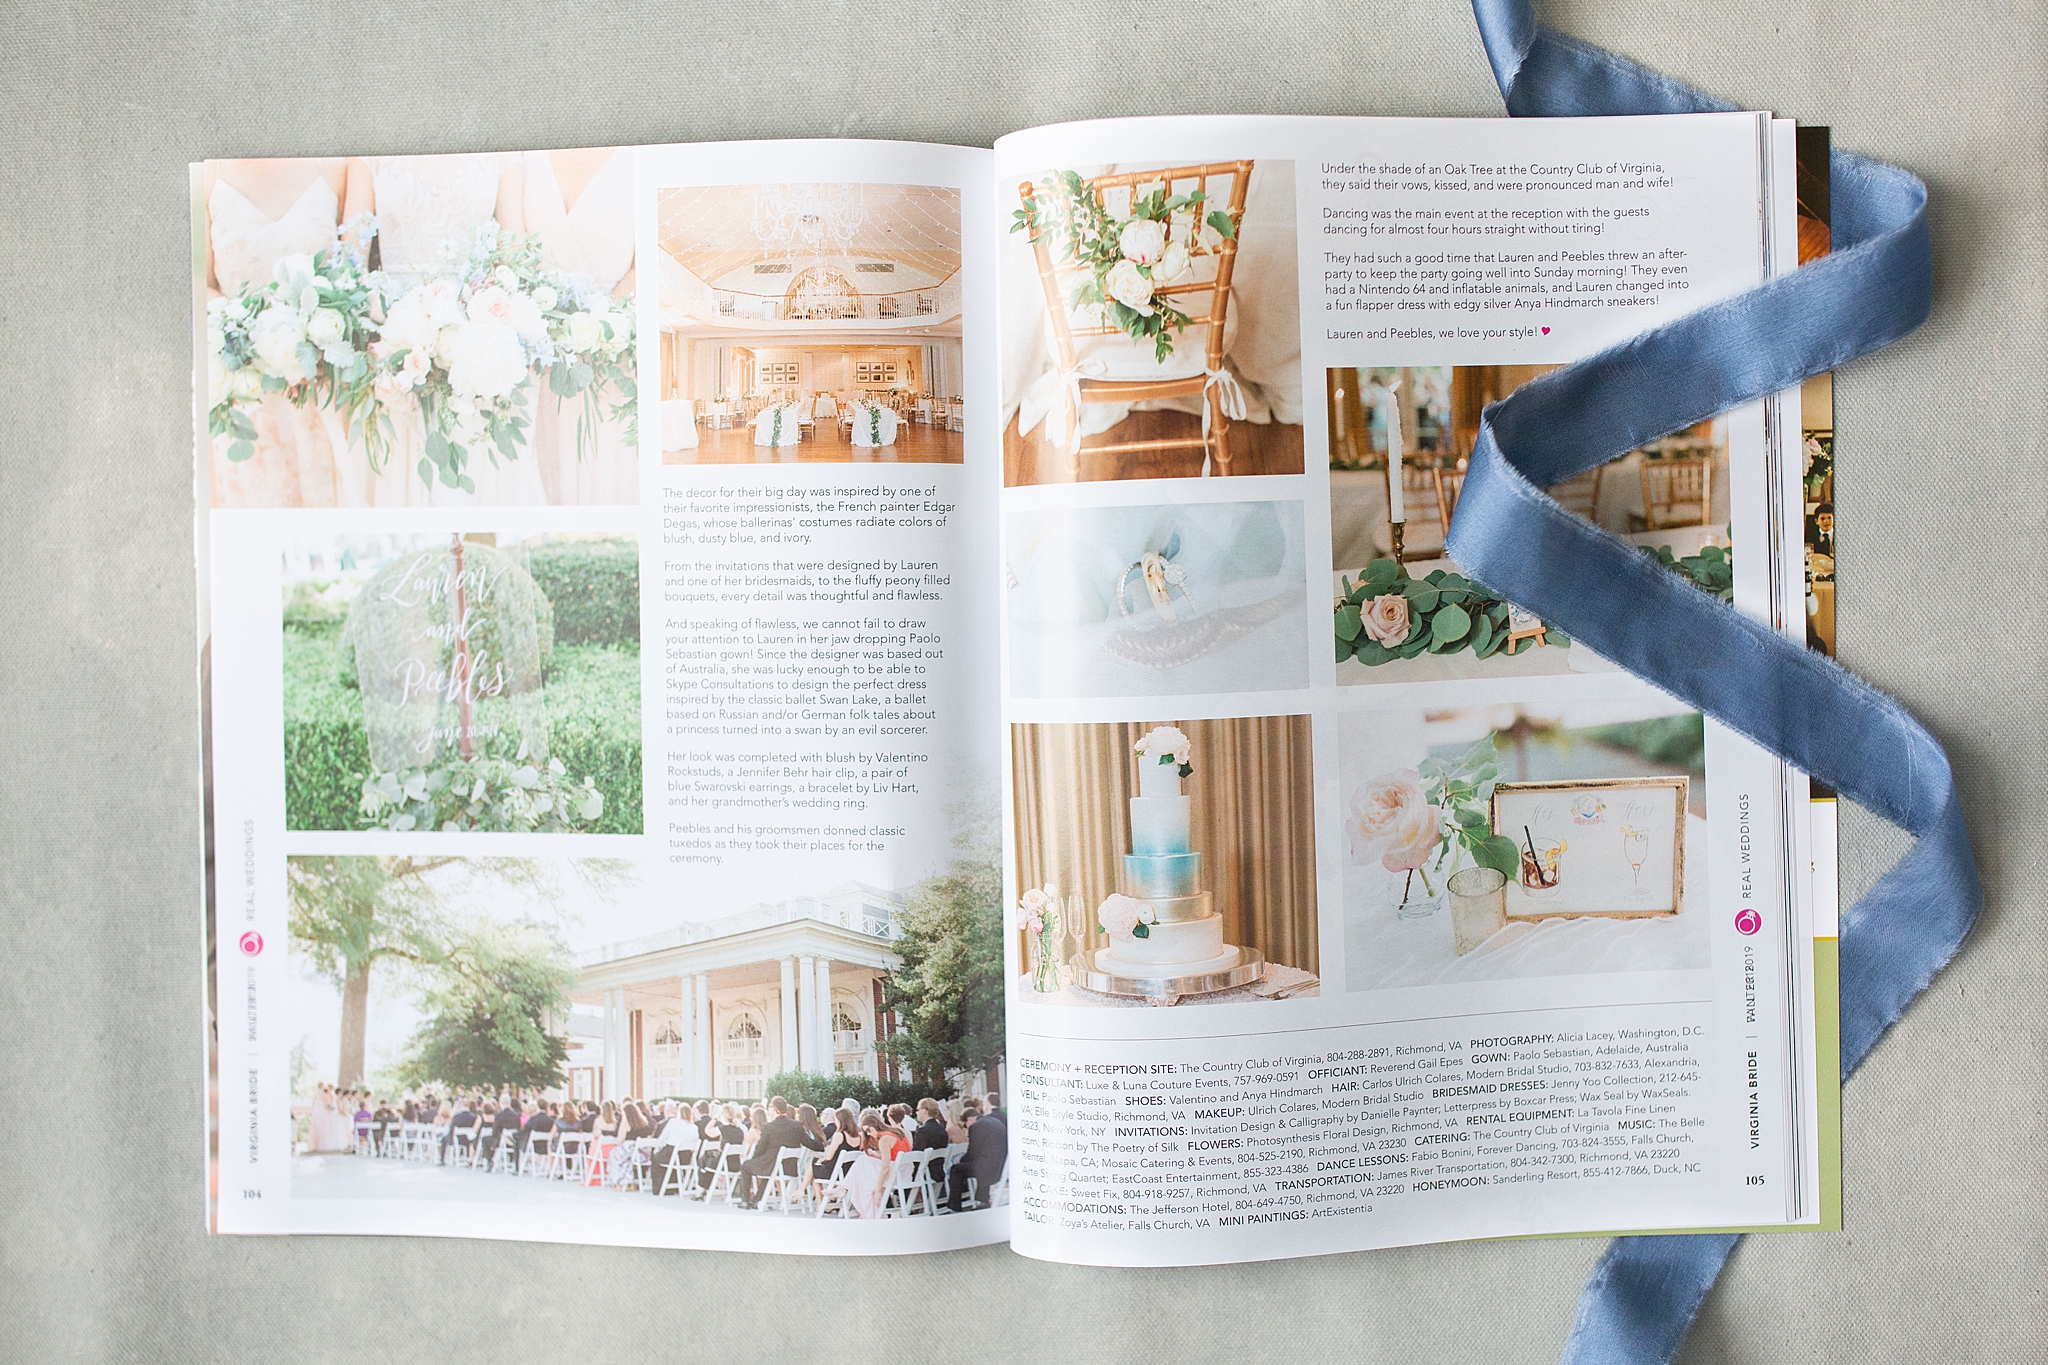 A ballet inspired wedding at the Country Club of Virginia in Richmond is featured in the most recent issue of VA Bride Magazine.